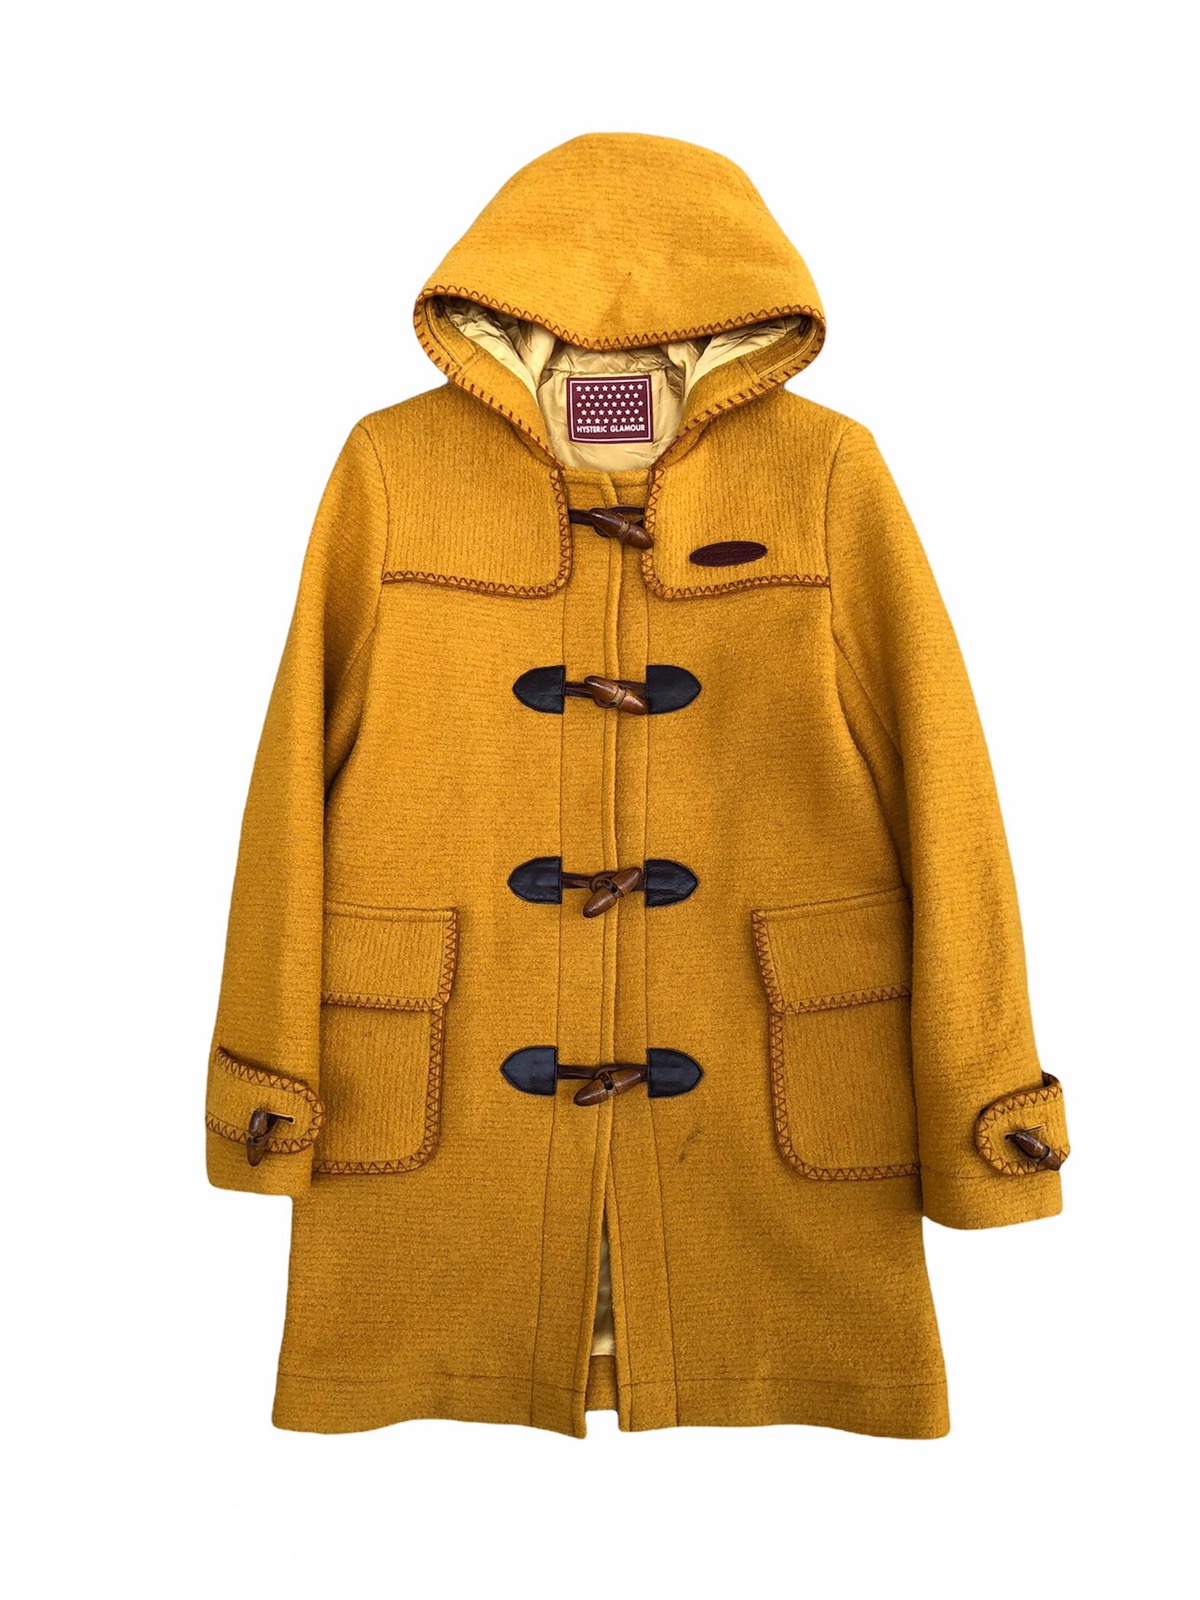 🔥HYSTERIC GLAMOUR DUFFEL COAT MADE IN JAPAN - 2